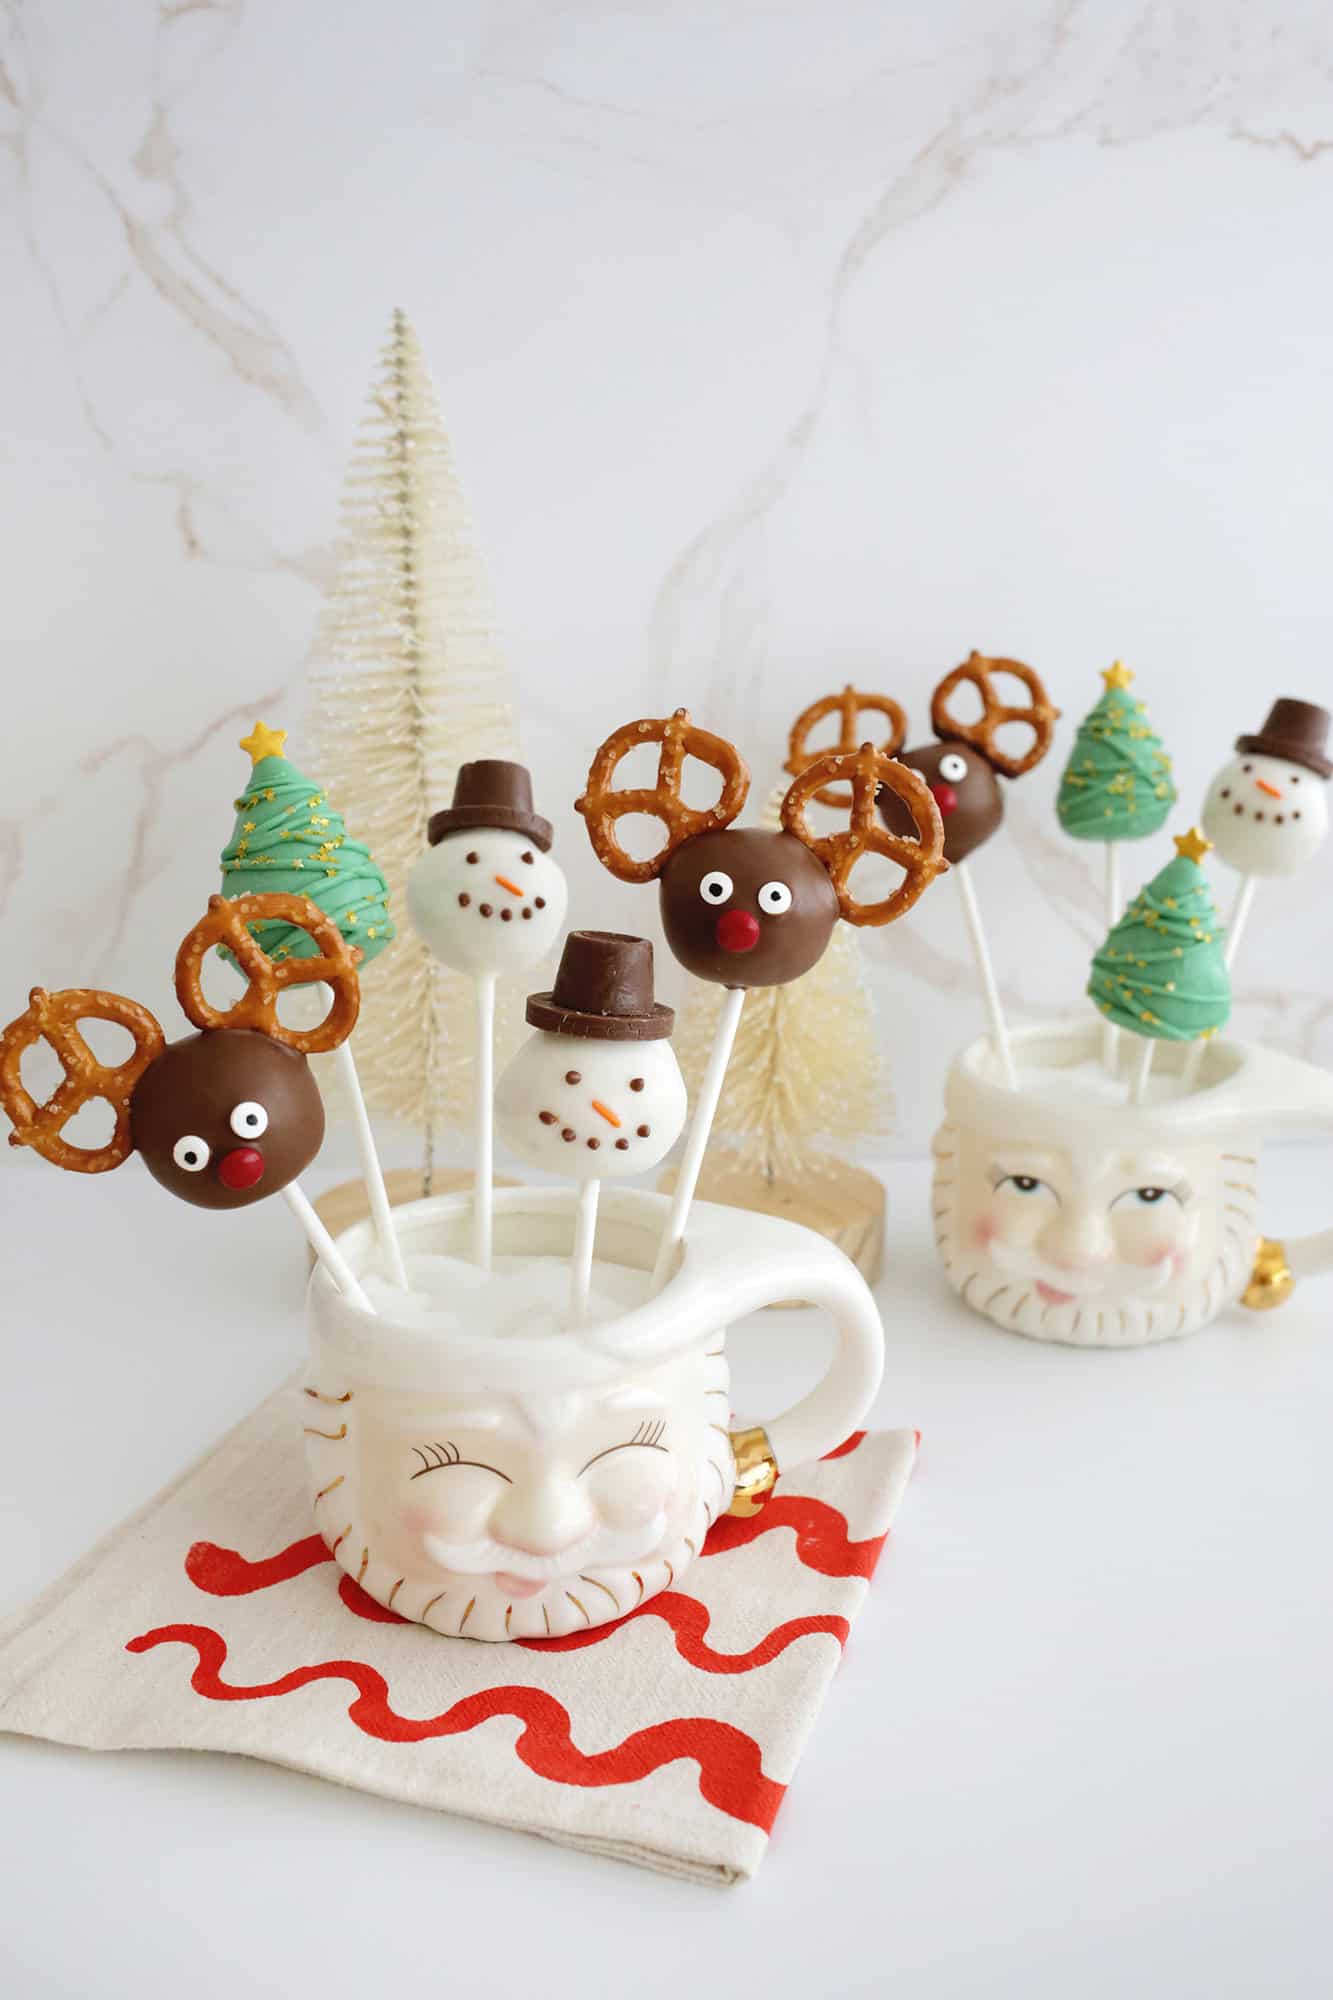 Christmas cake pops with reindeer, snowman, and Christmas tree